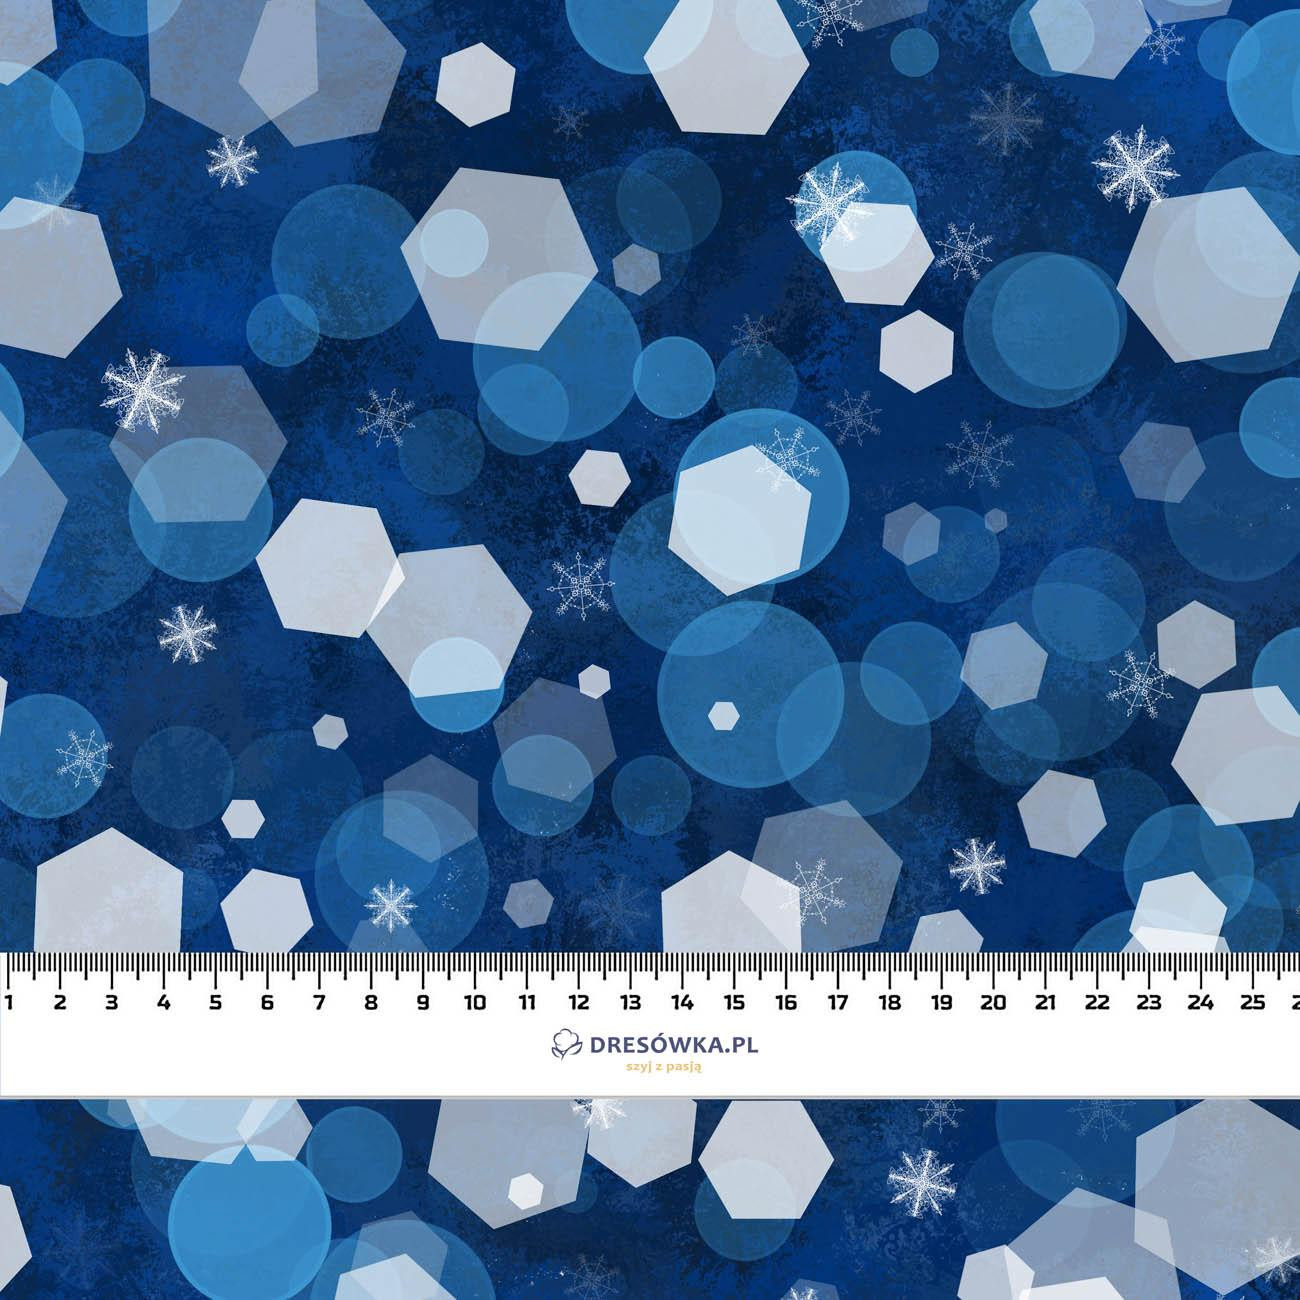 WINTER HEXAGON (WINTER IS COMING) - brushed knit fabric with teddy / alpine fleece